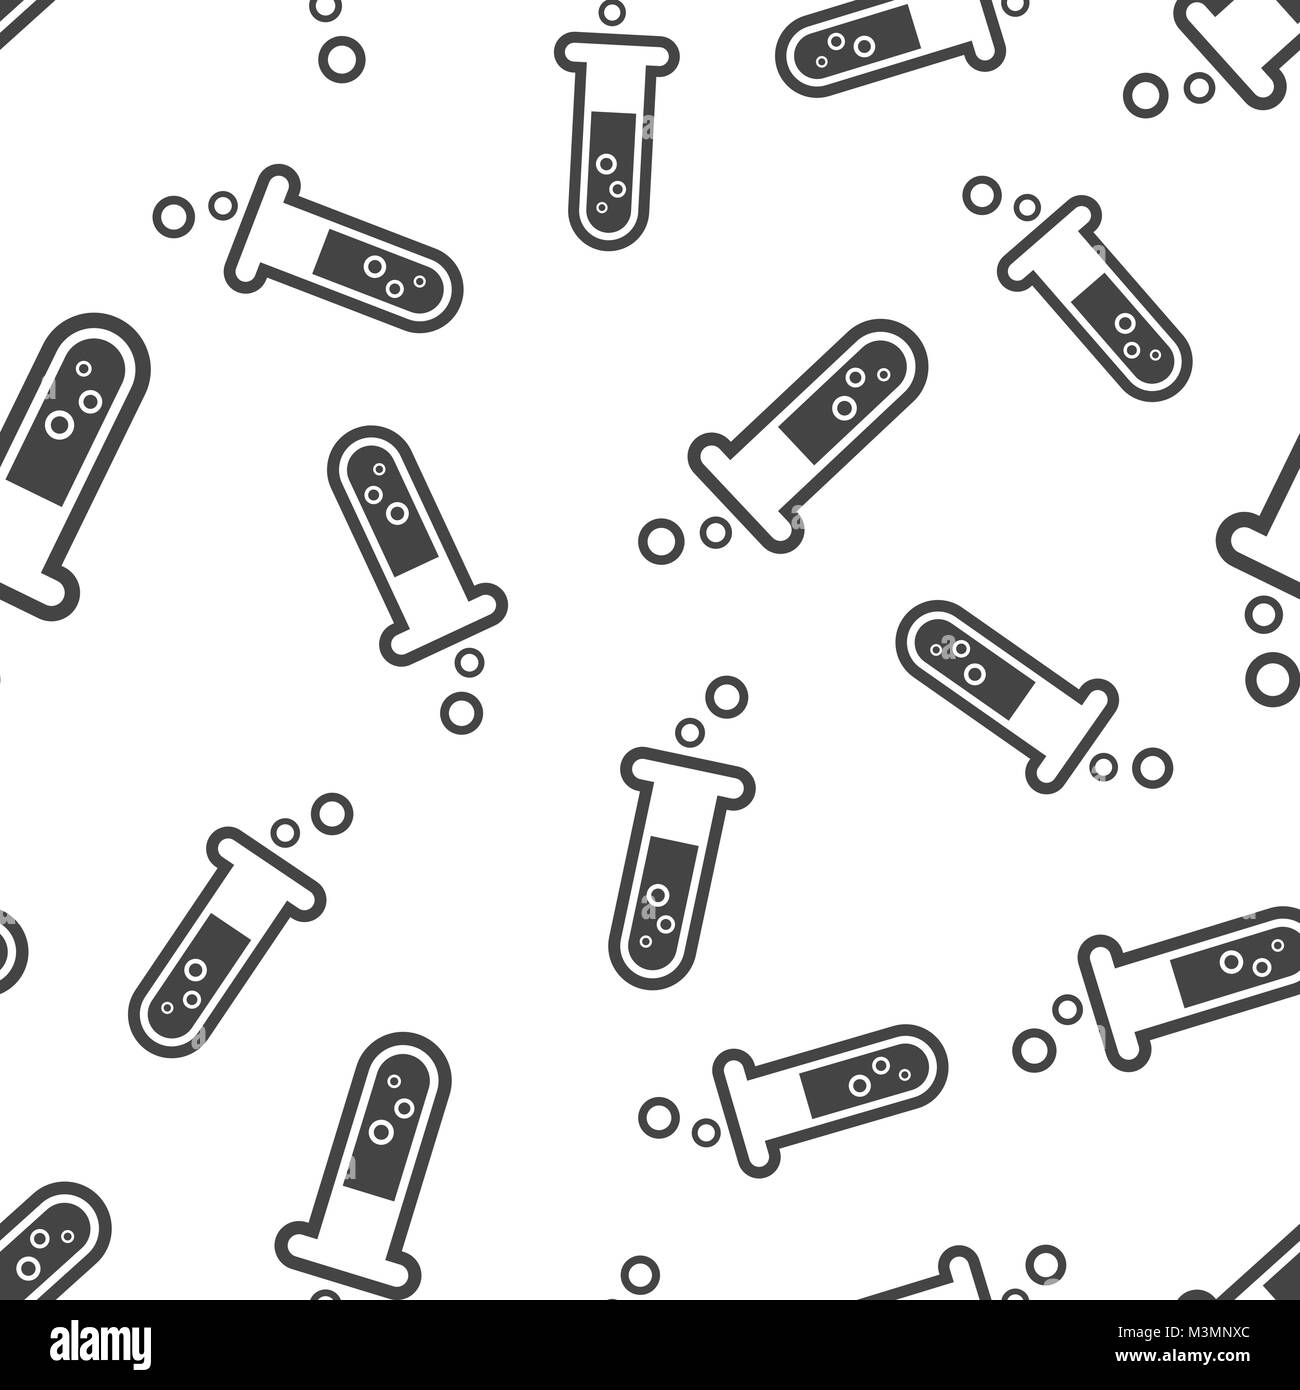 Chemical test tube seamless pattern background. Business flat vector illustration. Experiment flasks sign symbol pattern. Stock Vector